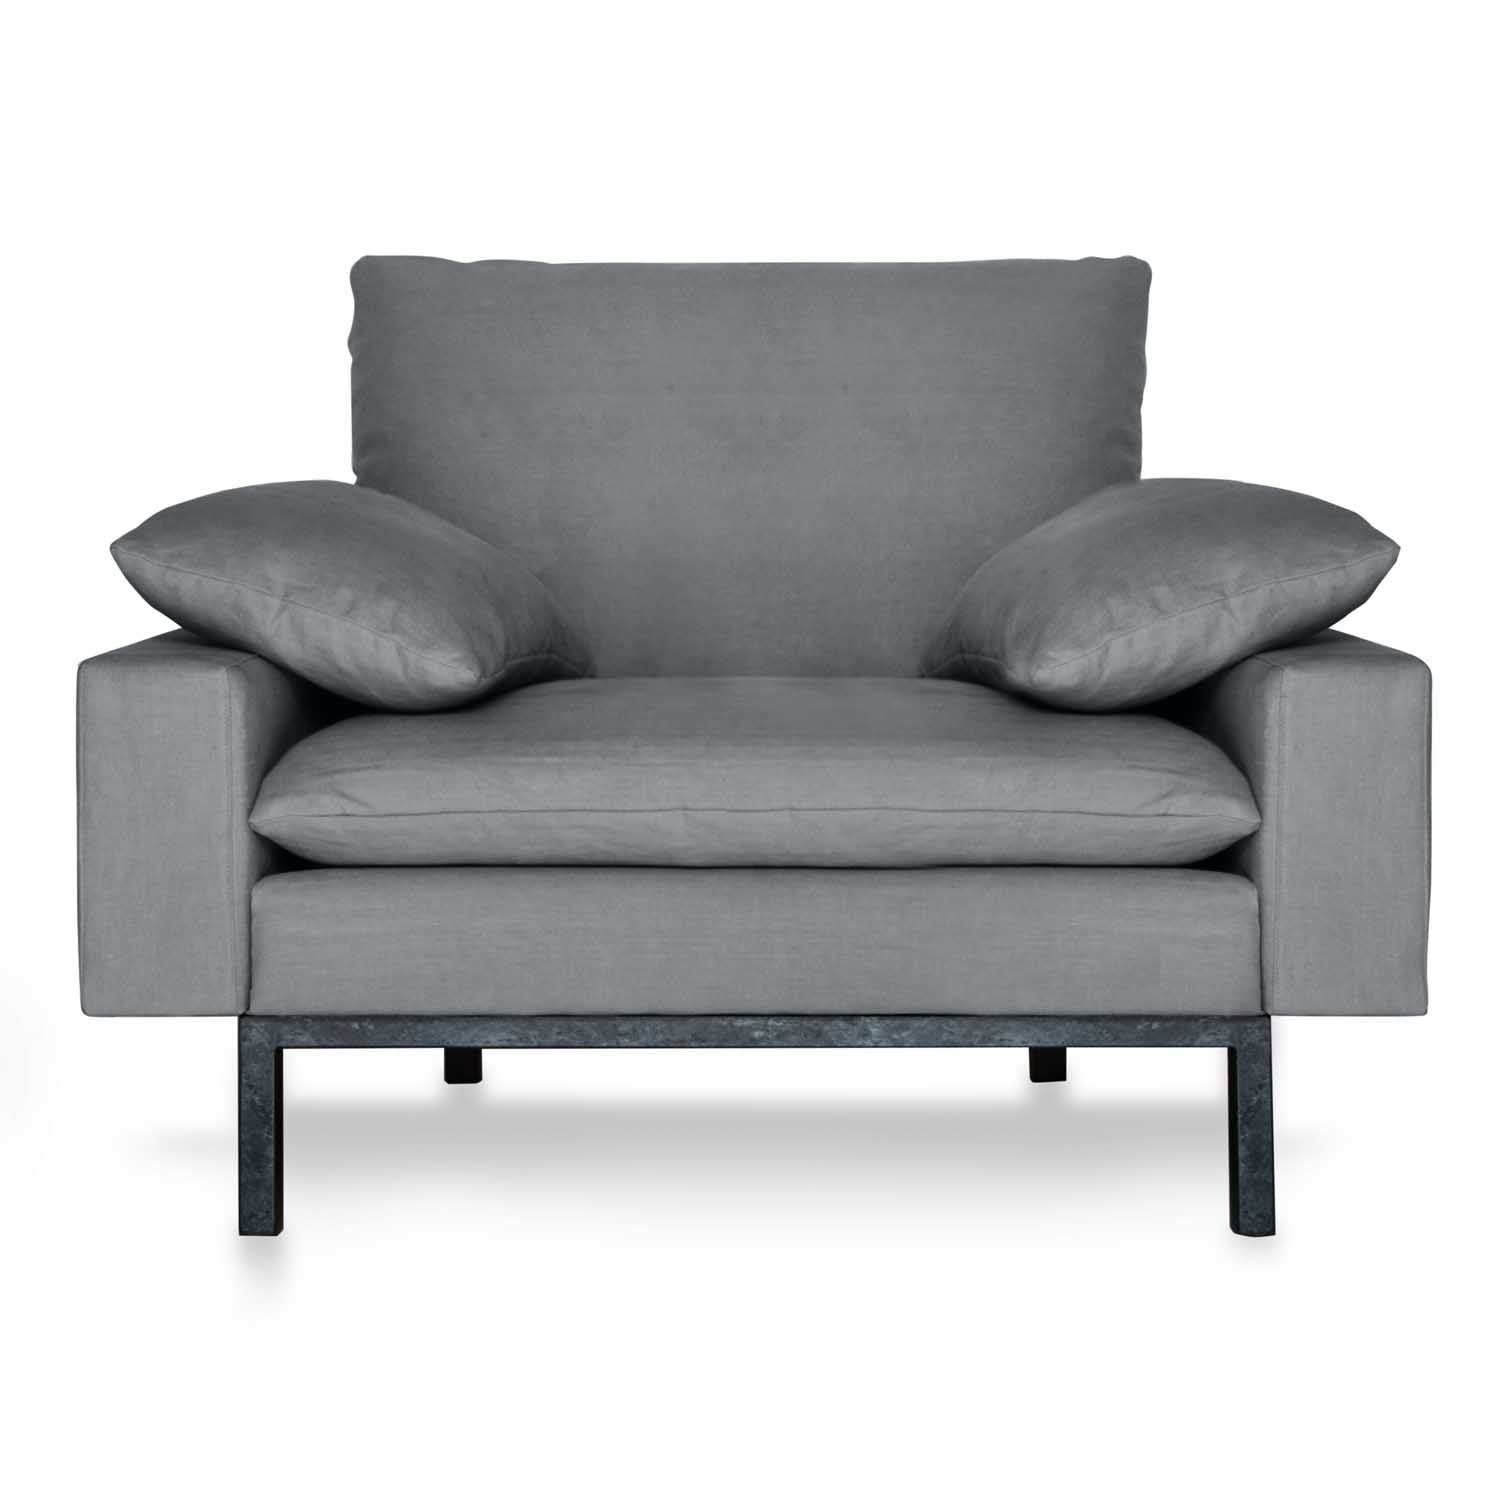 Stylish Addition to Your Living Space. grey cotton armchair.